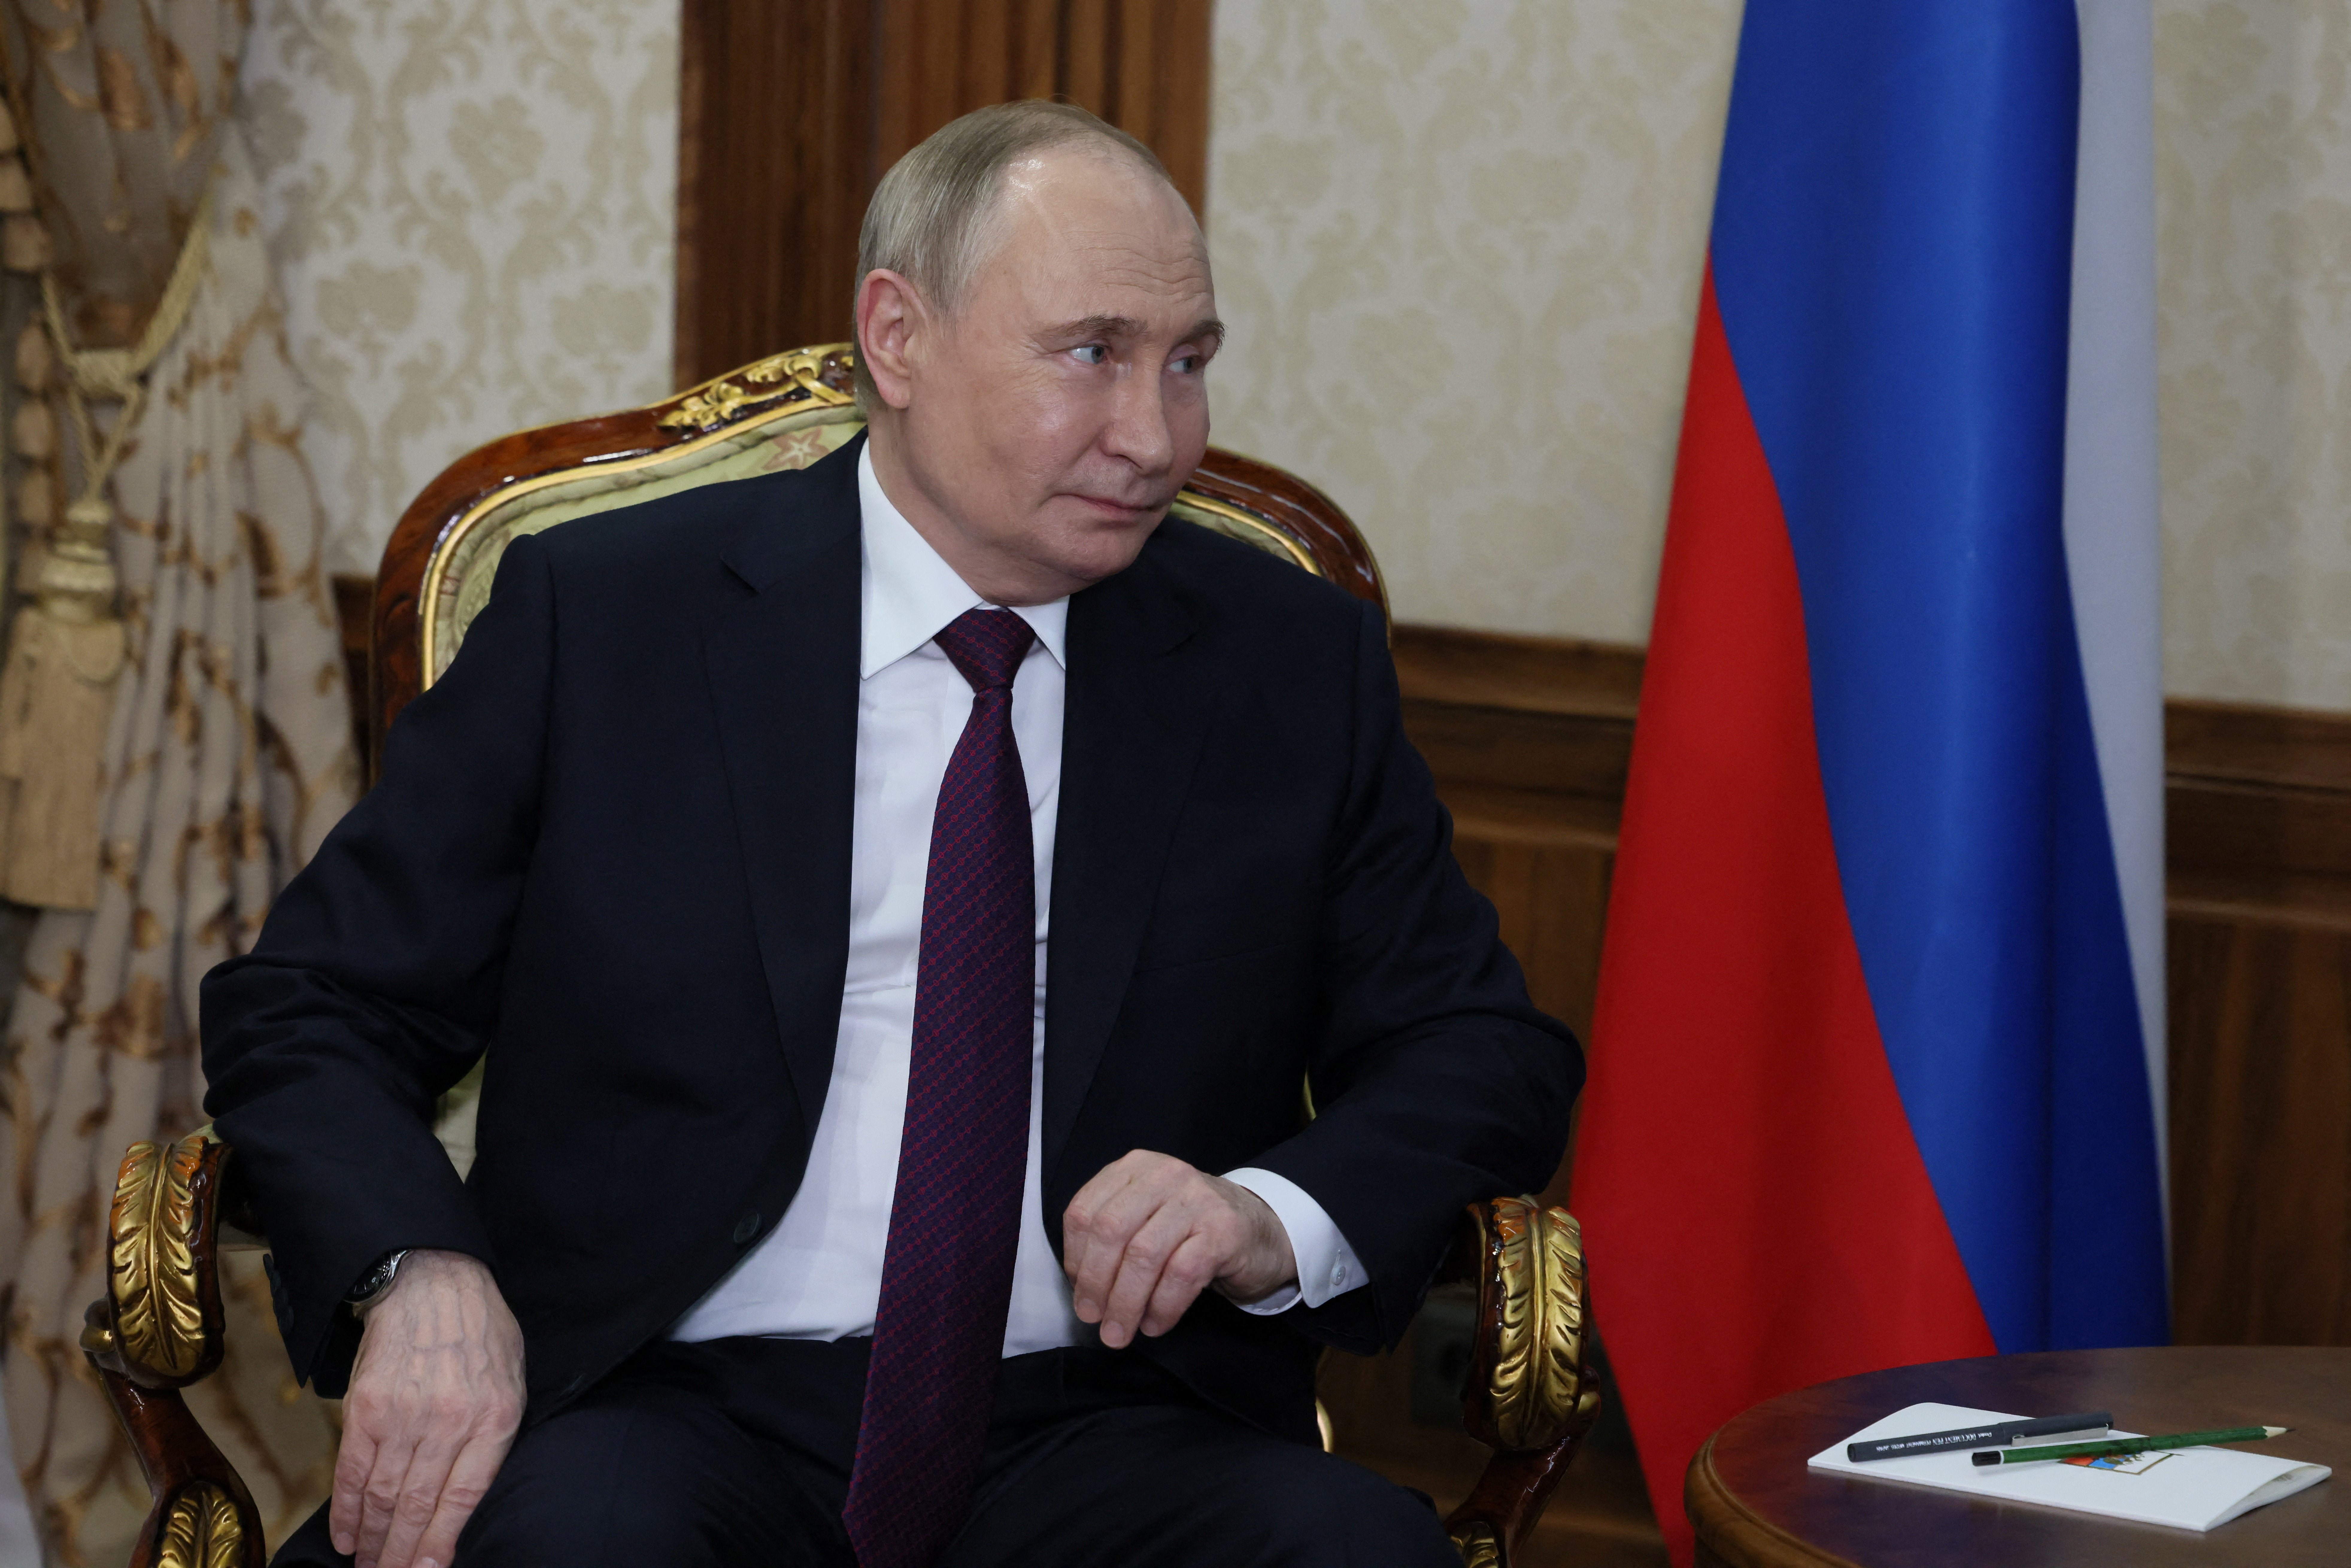 Russian President Vladimir Putin looks on during a meeting with Belarusian President Alexander Lukashenko (not pictured) in Minsk